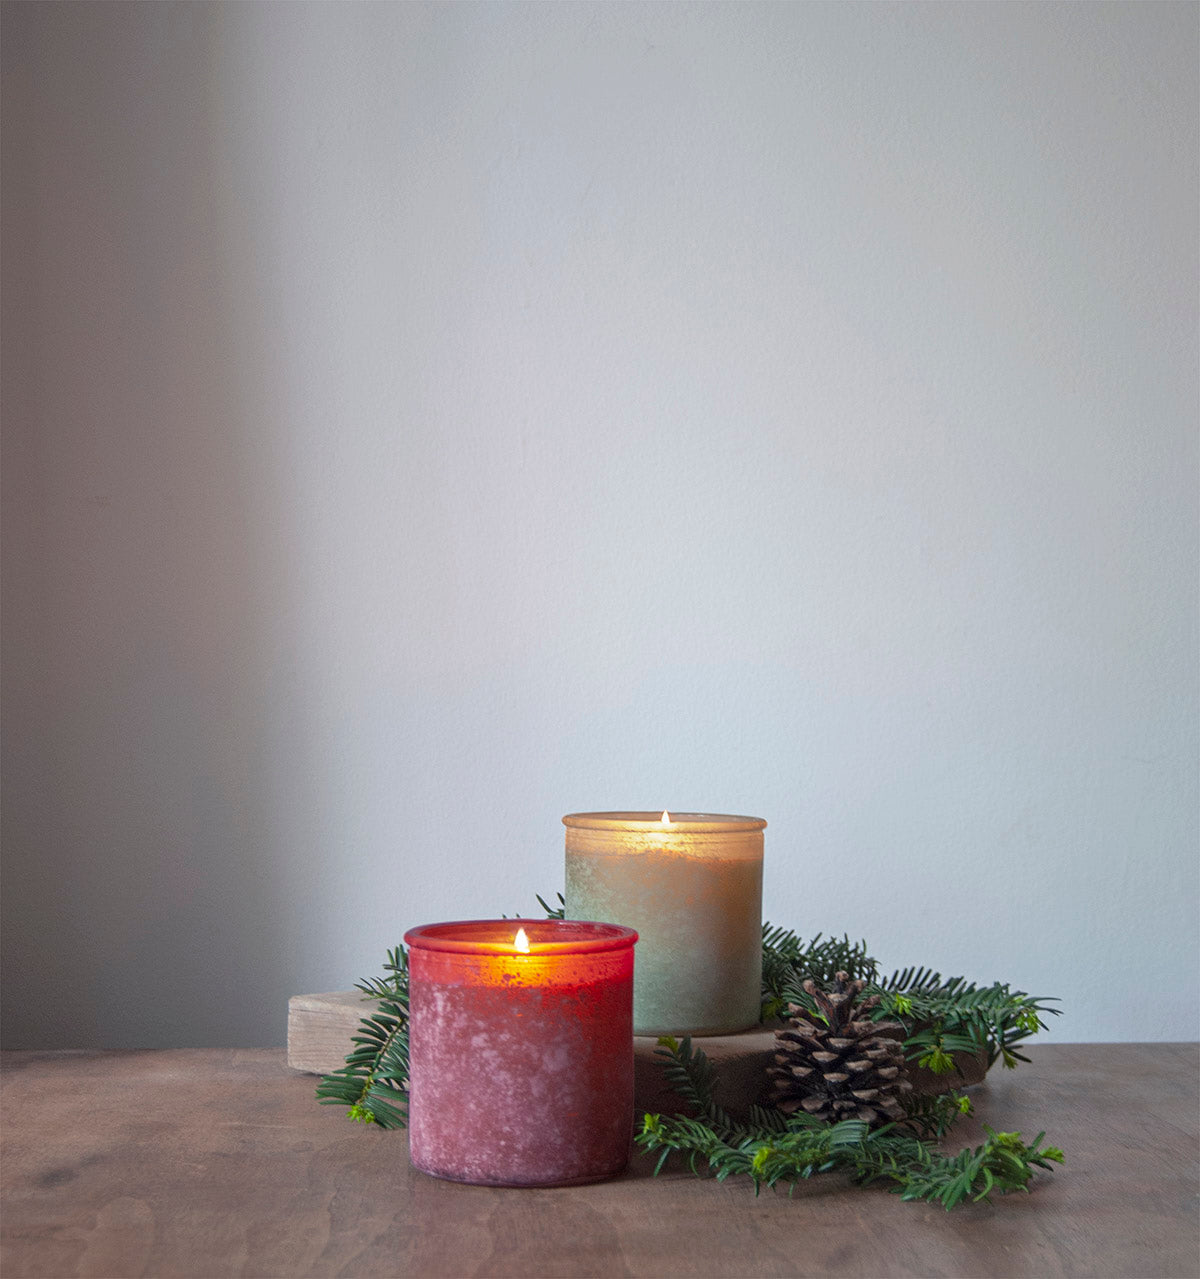 Blackberry River Rock Candle in Sage Candle Eleven Point   